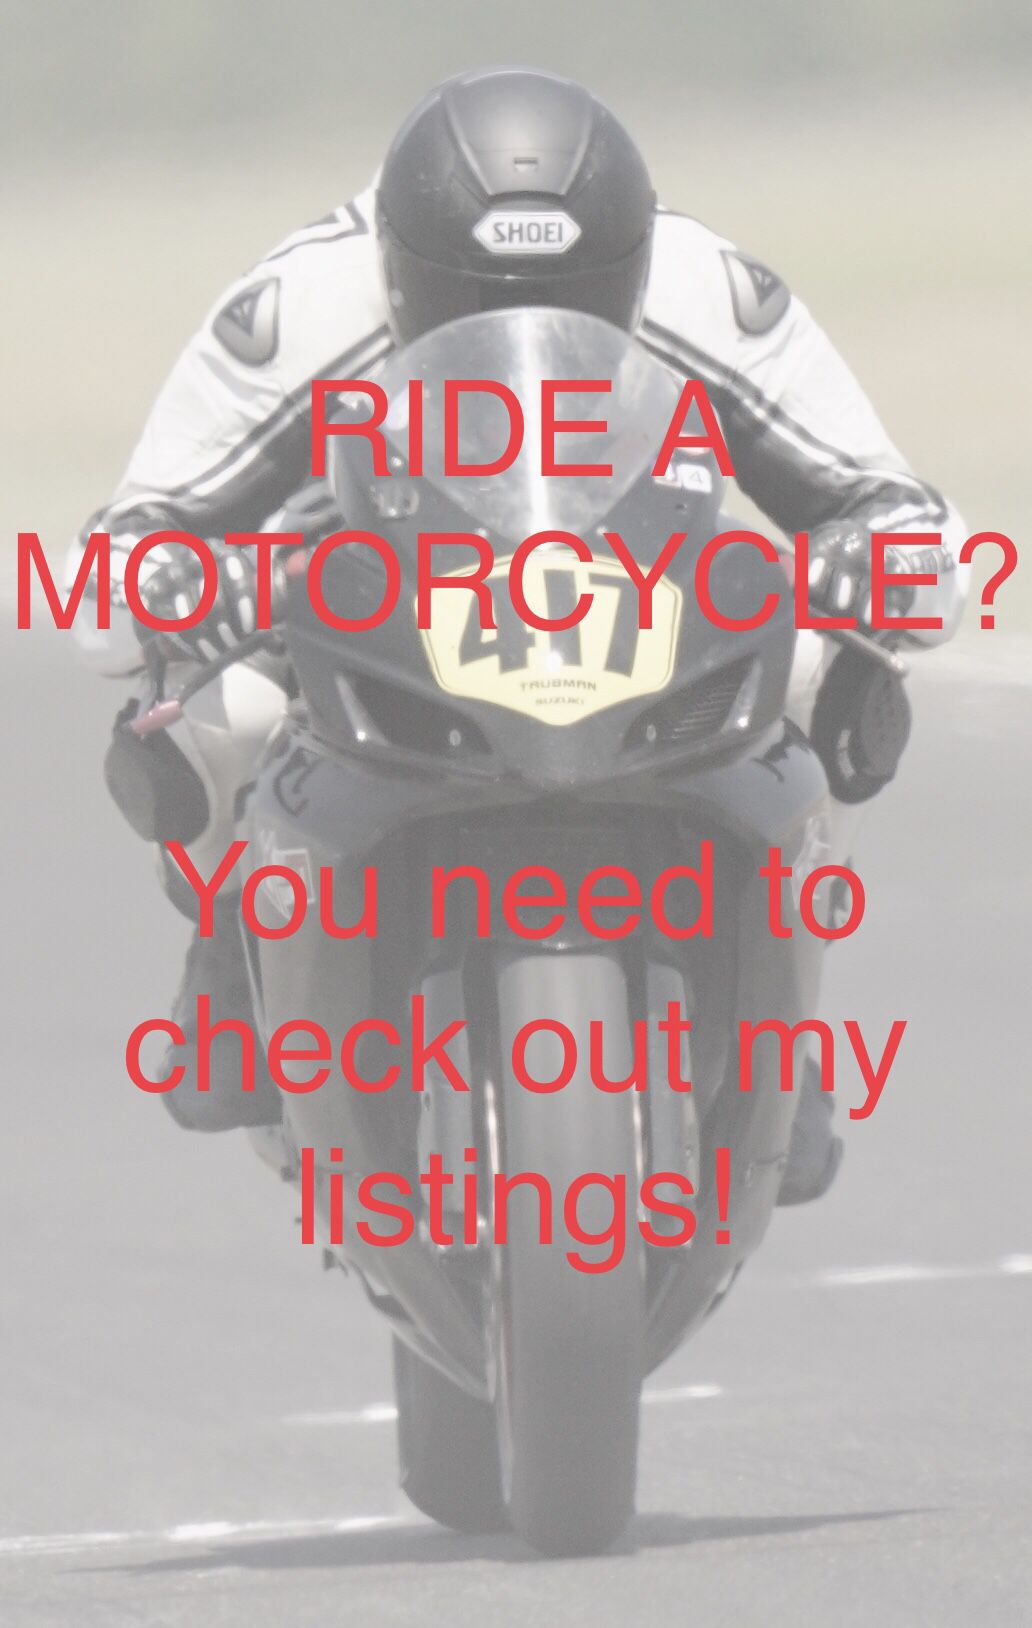 Tons of motorcycle gear and parts